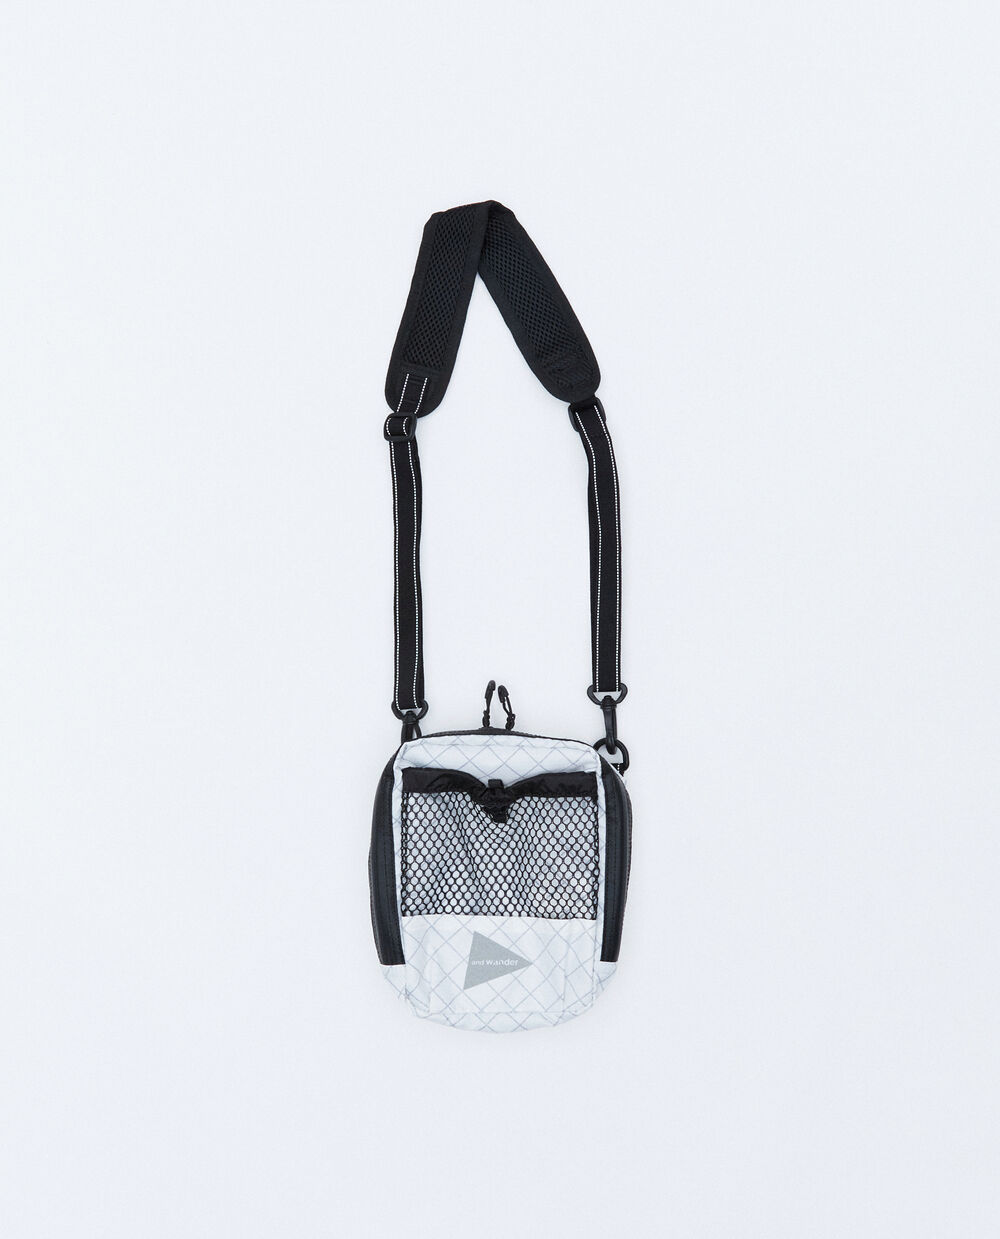 AND WANDER ECOPAK SHOLDER POUCH